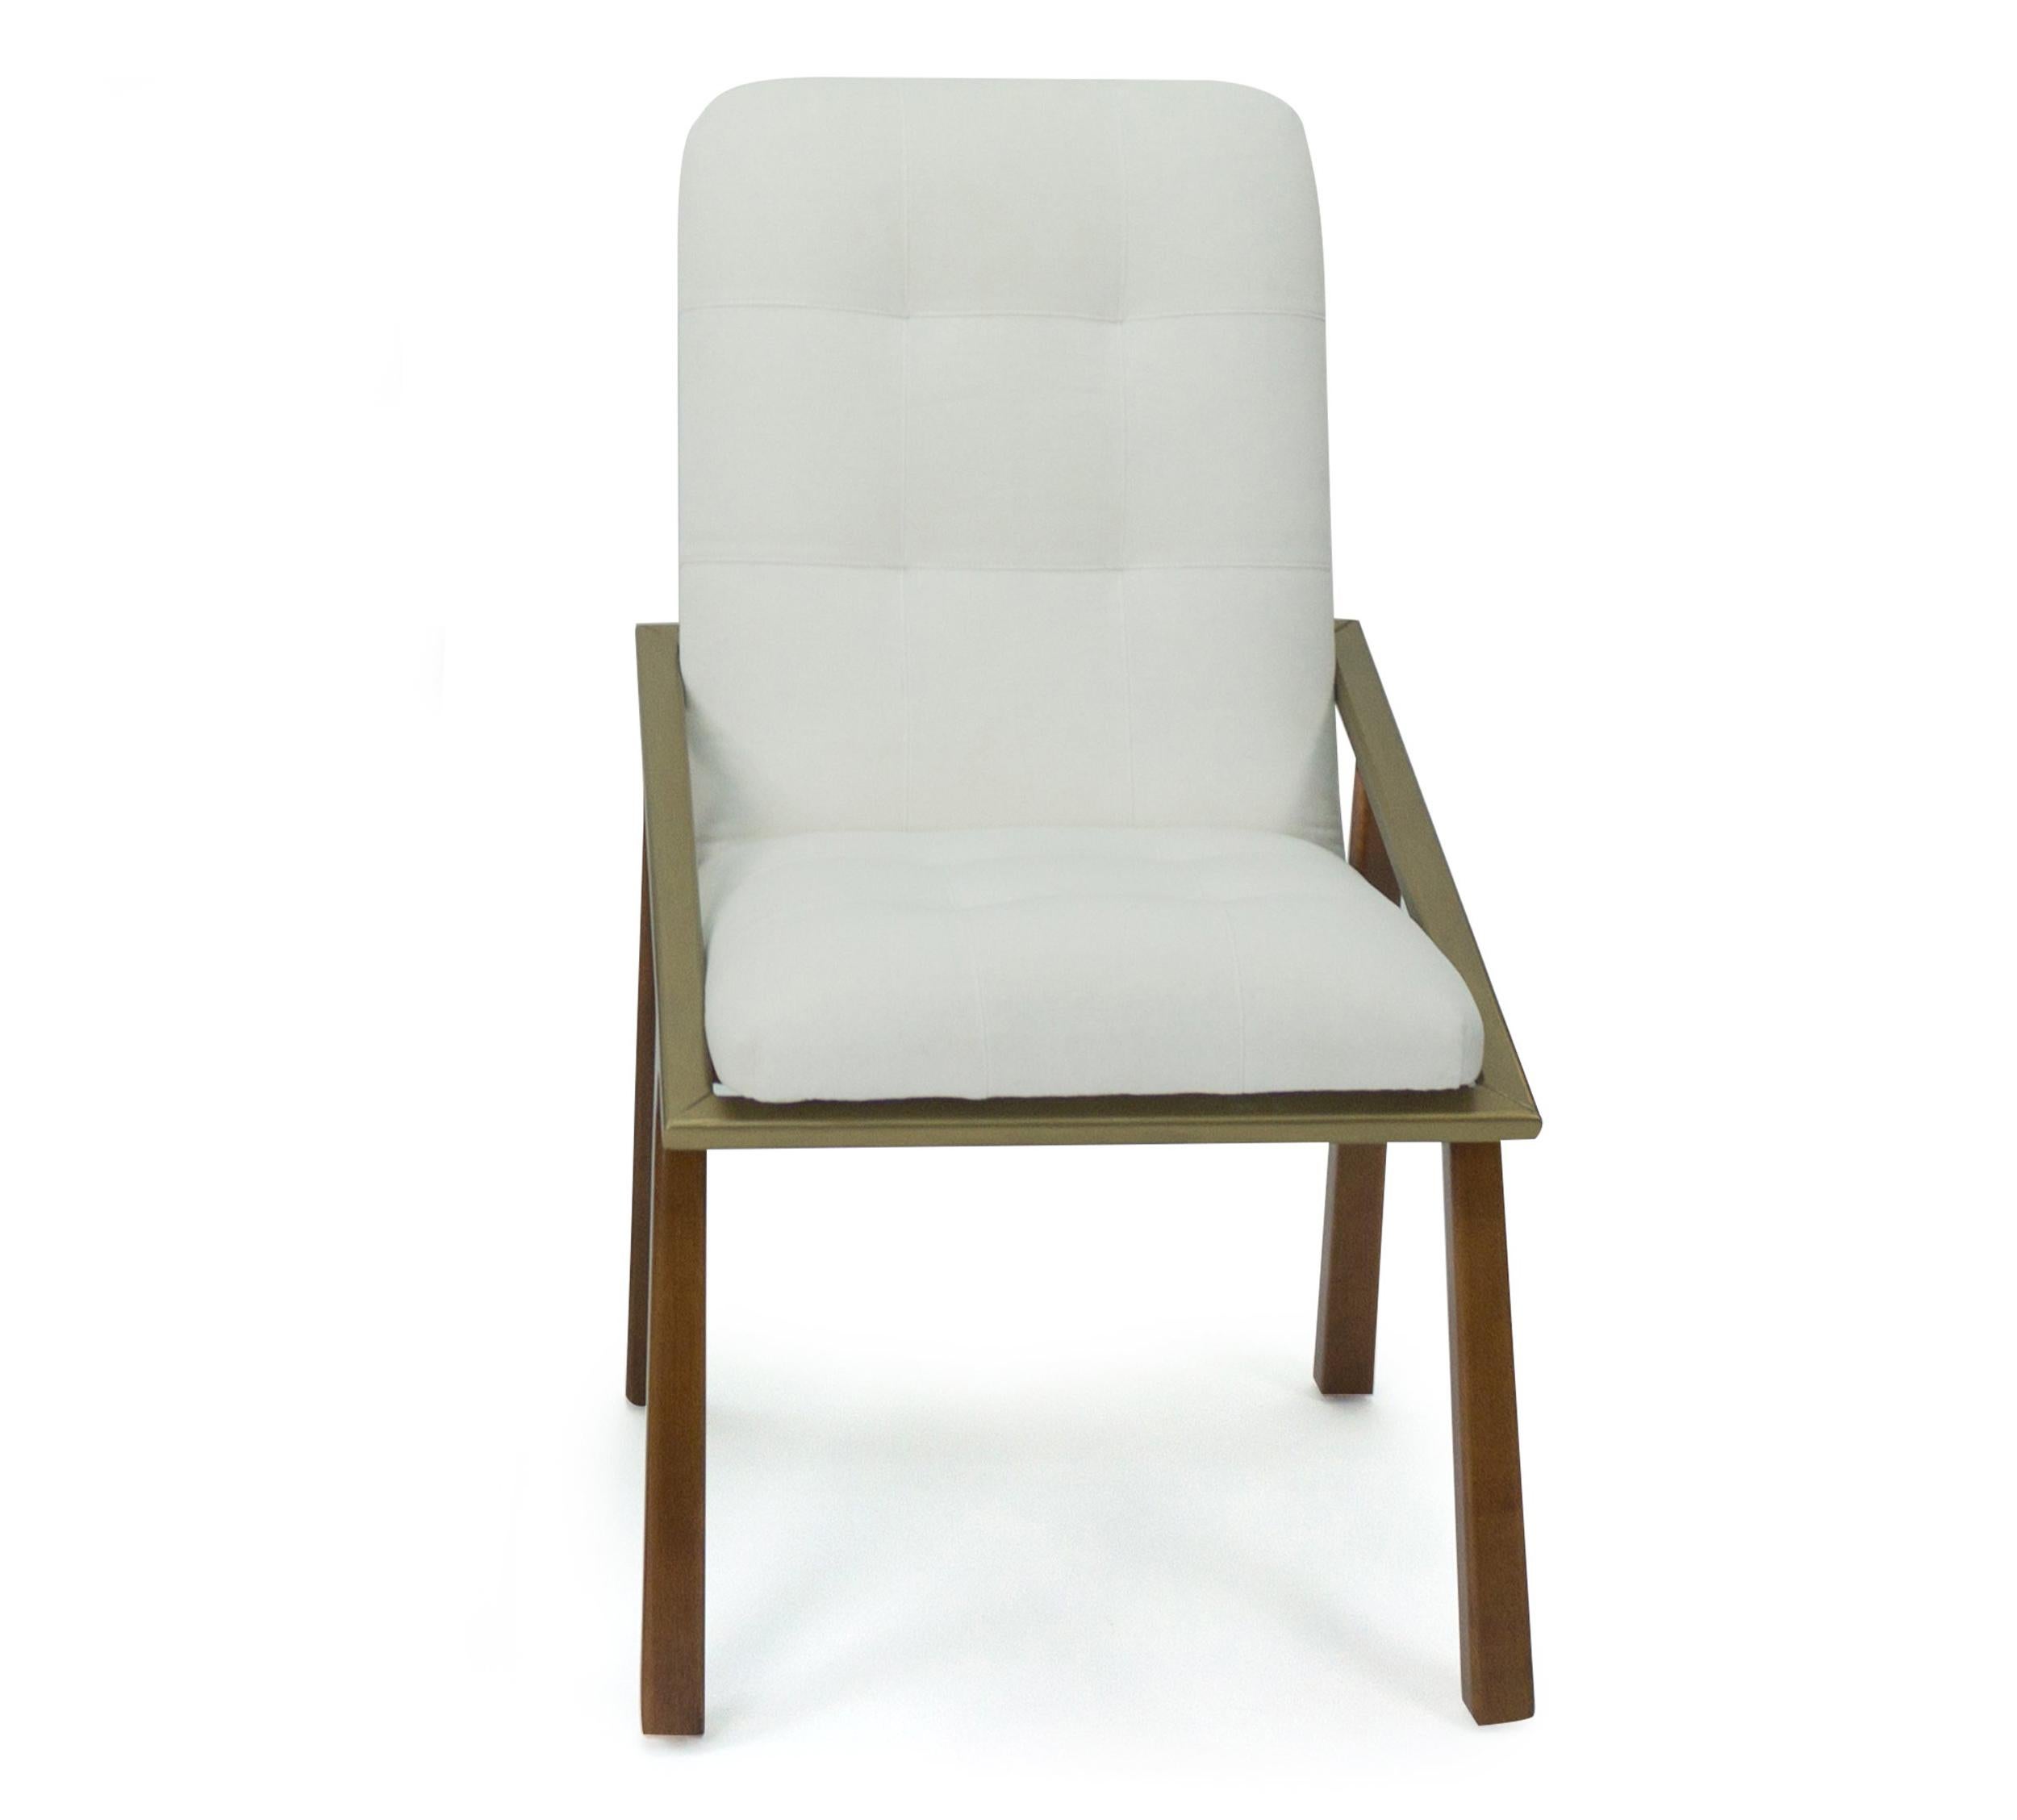 This modern built to order dining chair is designed by us and manufactured in CT. The slightly flared legs are constructed of maple and finished in a light honey walnut stain. On the exterior is an angled rectangular satellite painted in metallic